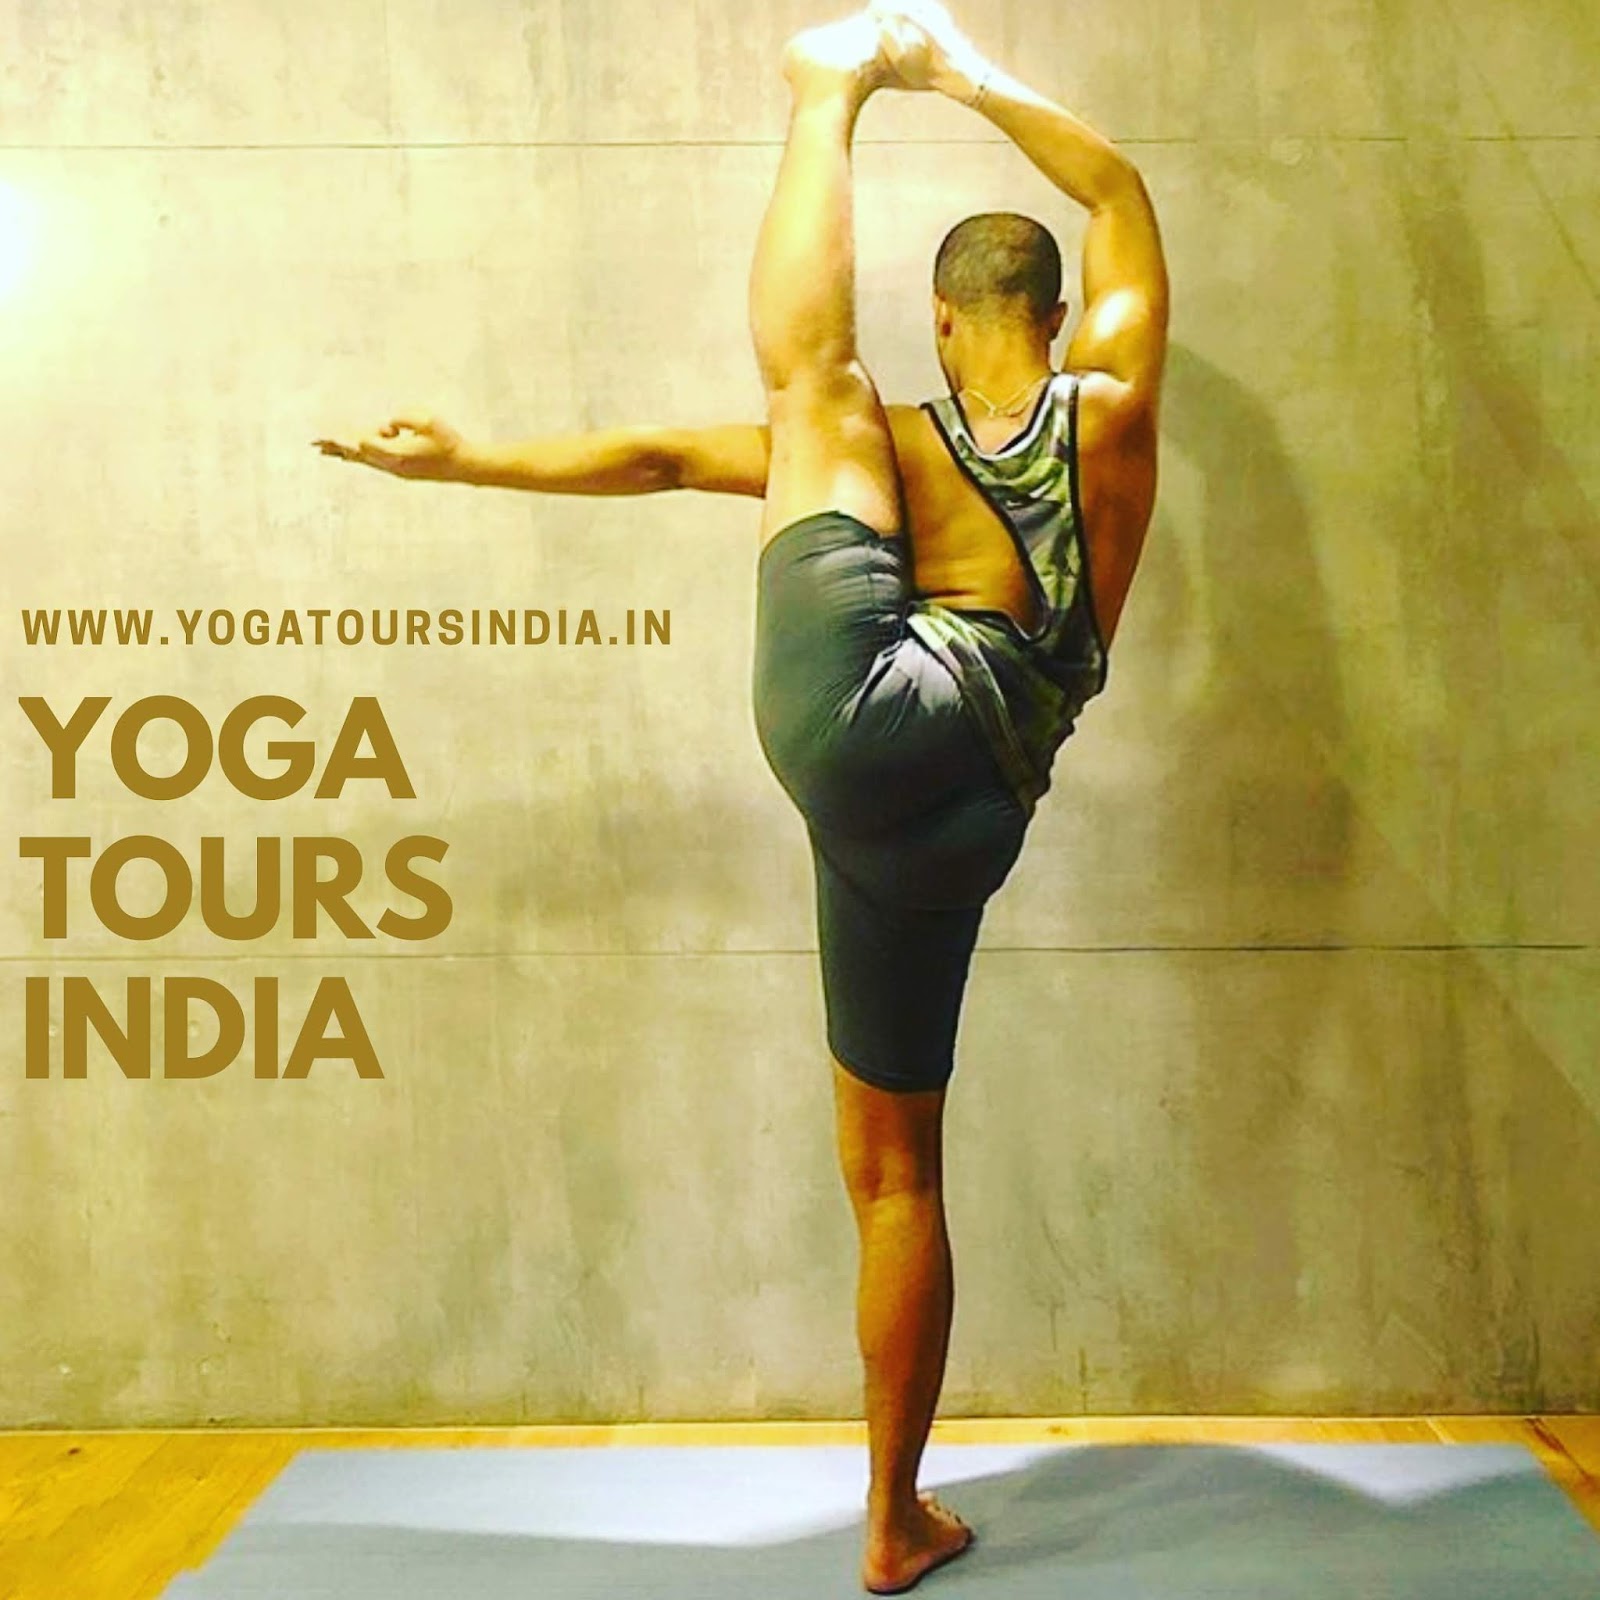 Yoga is cessation of the movement of mind